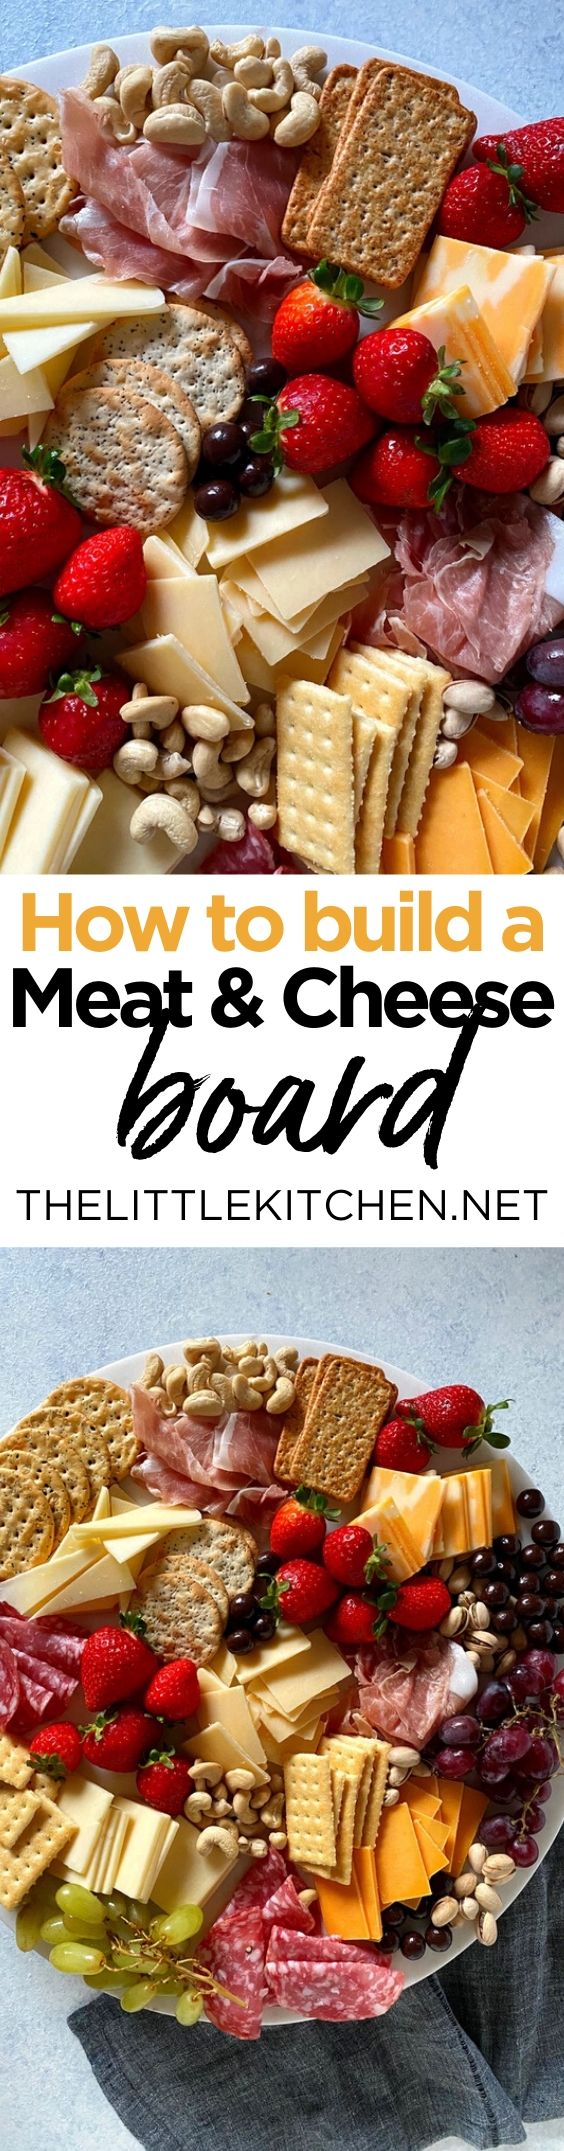 How to Build a Meat and Cheese Board from thelittlekitchen.net